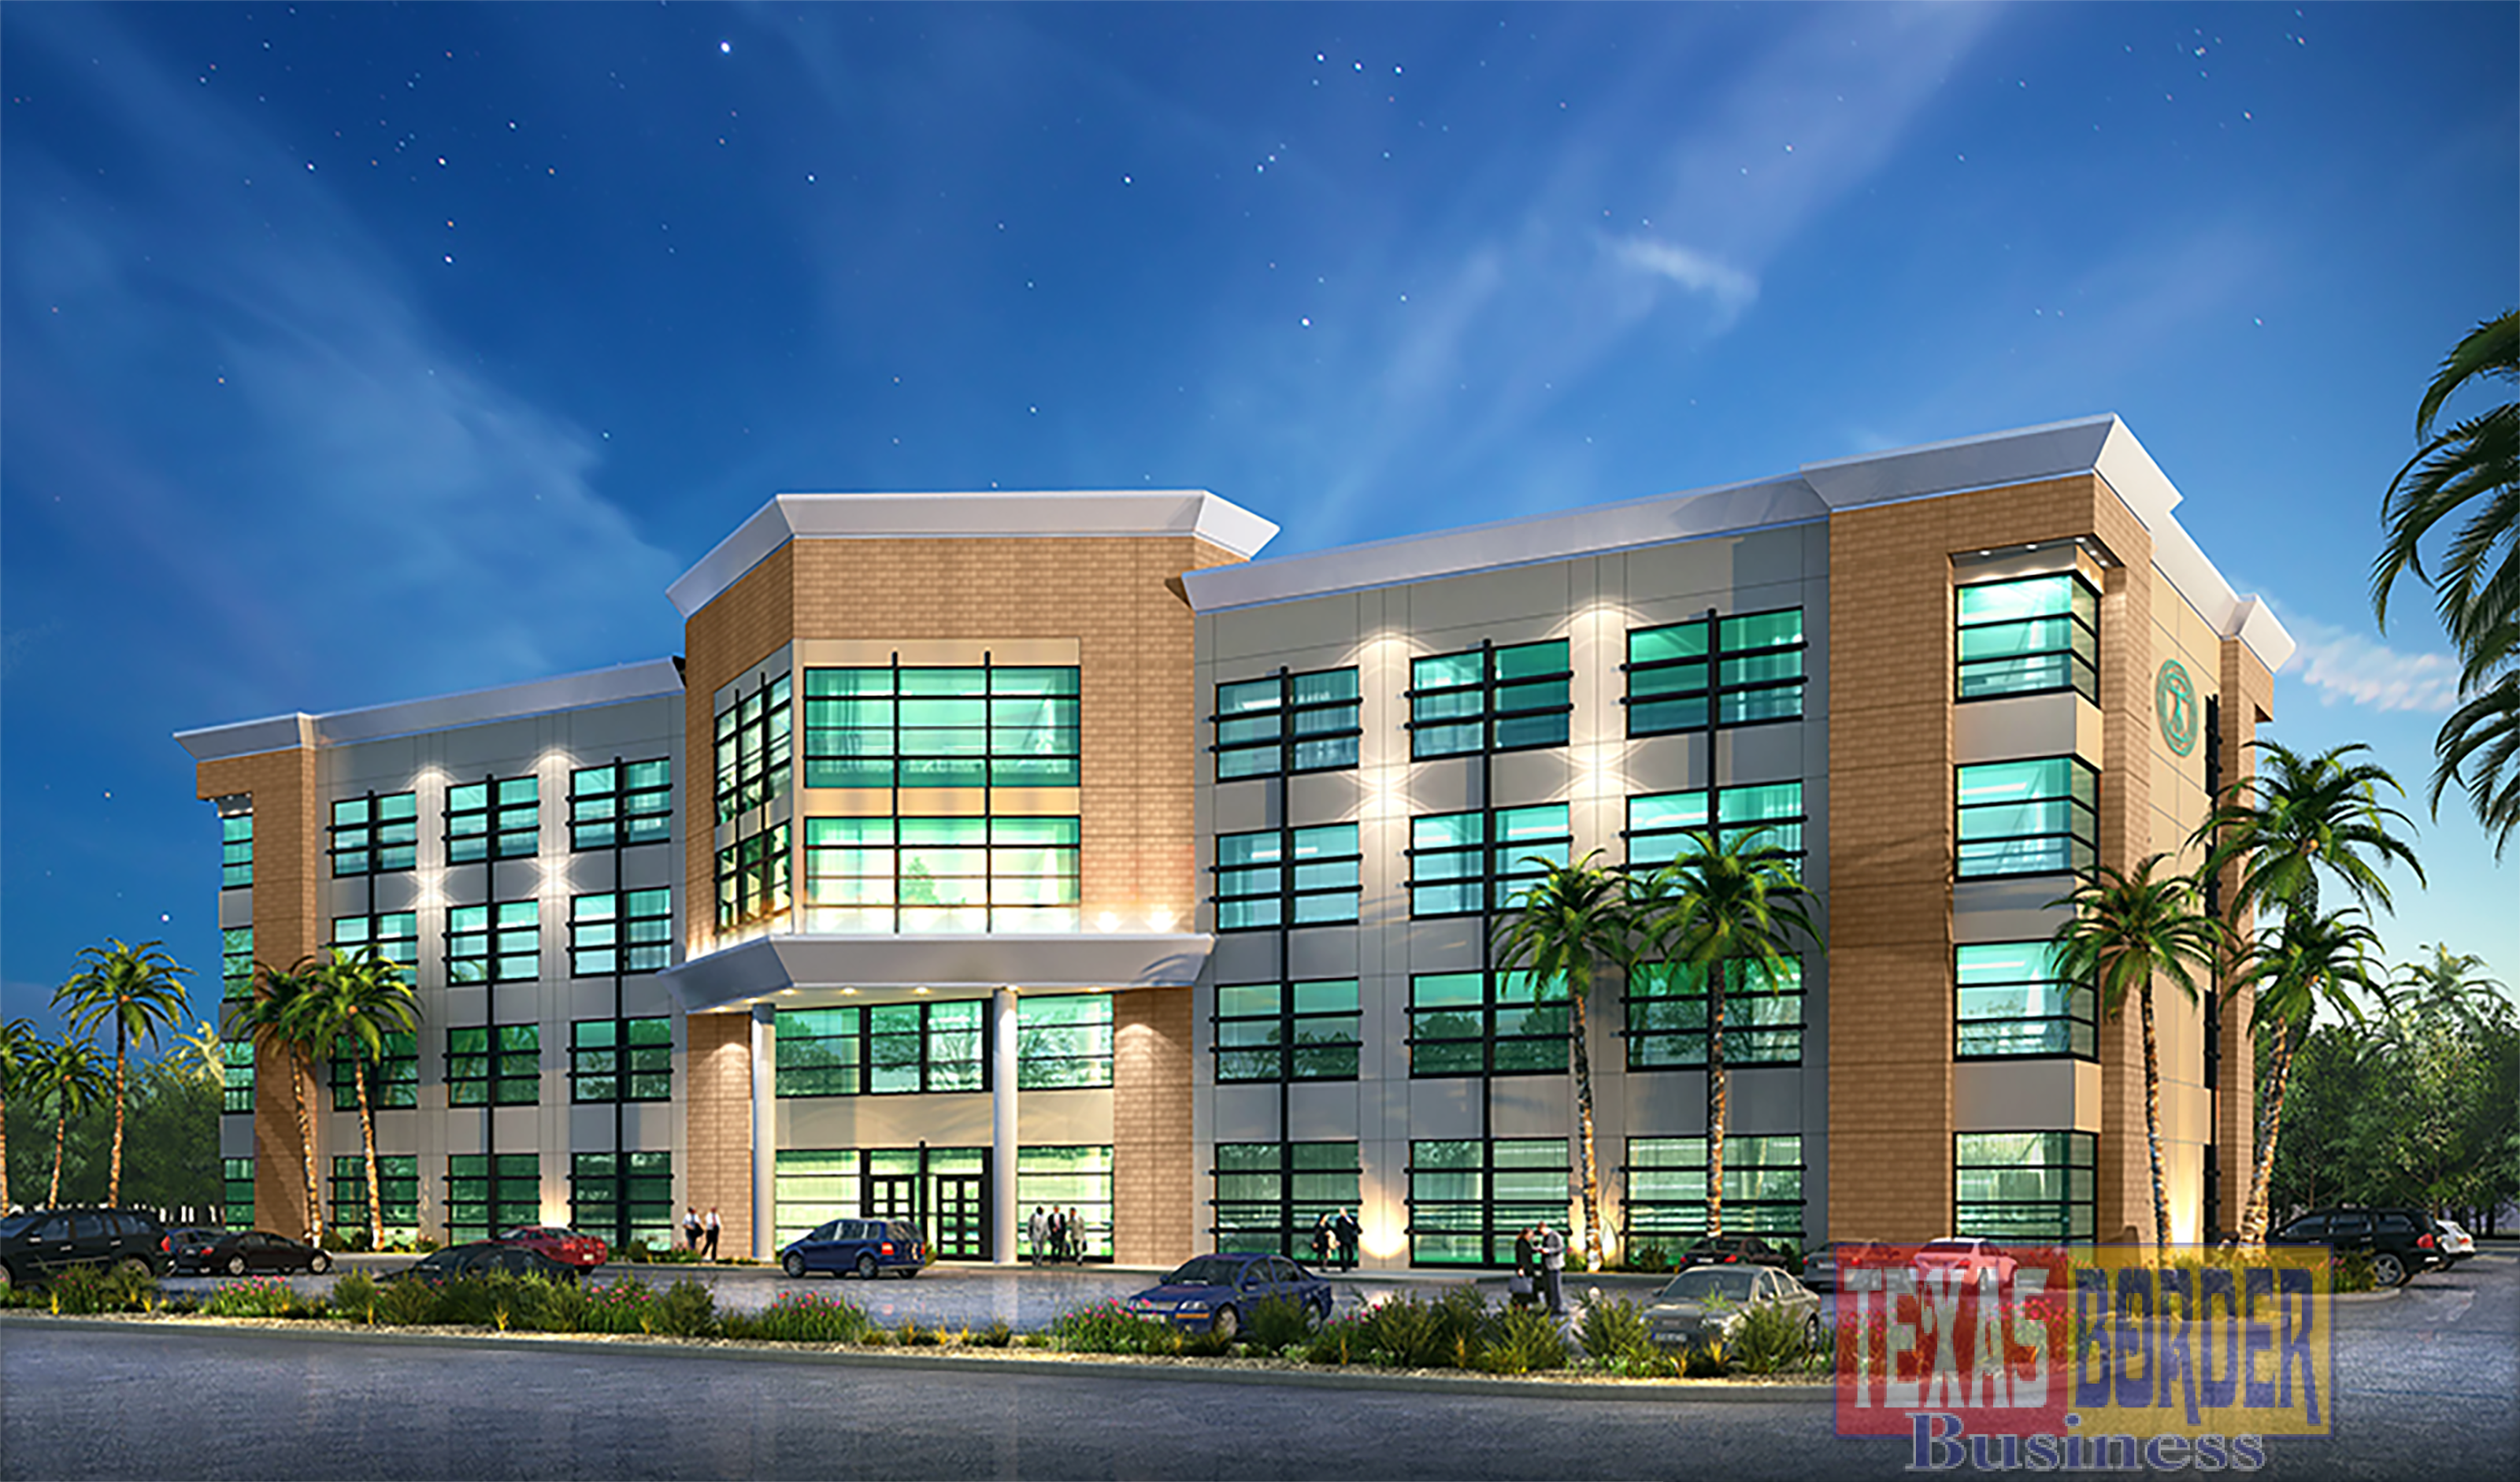 The state of the art Breast Center of Excellence will be located on the South Campus of Doctors Hospital at Renaissance and will feature leading imaging technology to help in the early diagnosis of cancer in women of the Rio Grande Valley. 